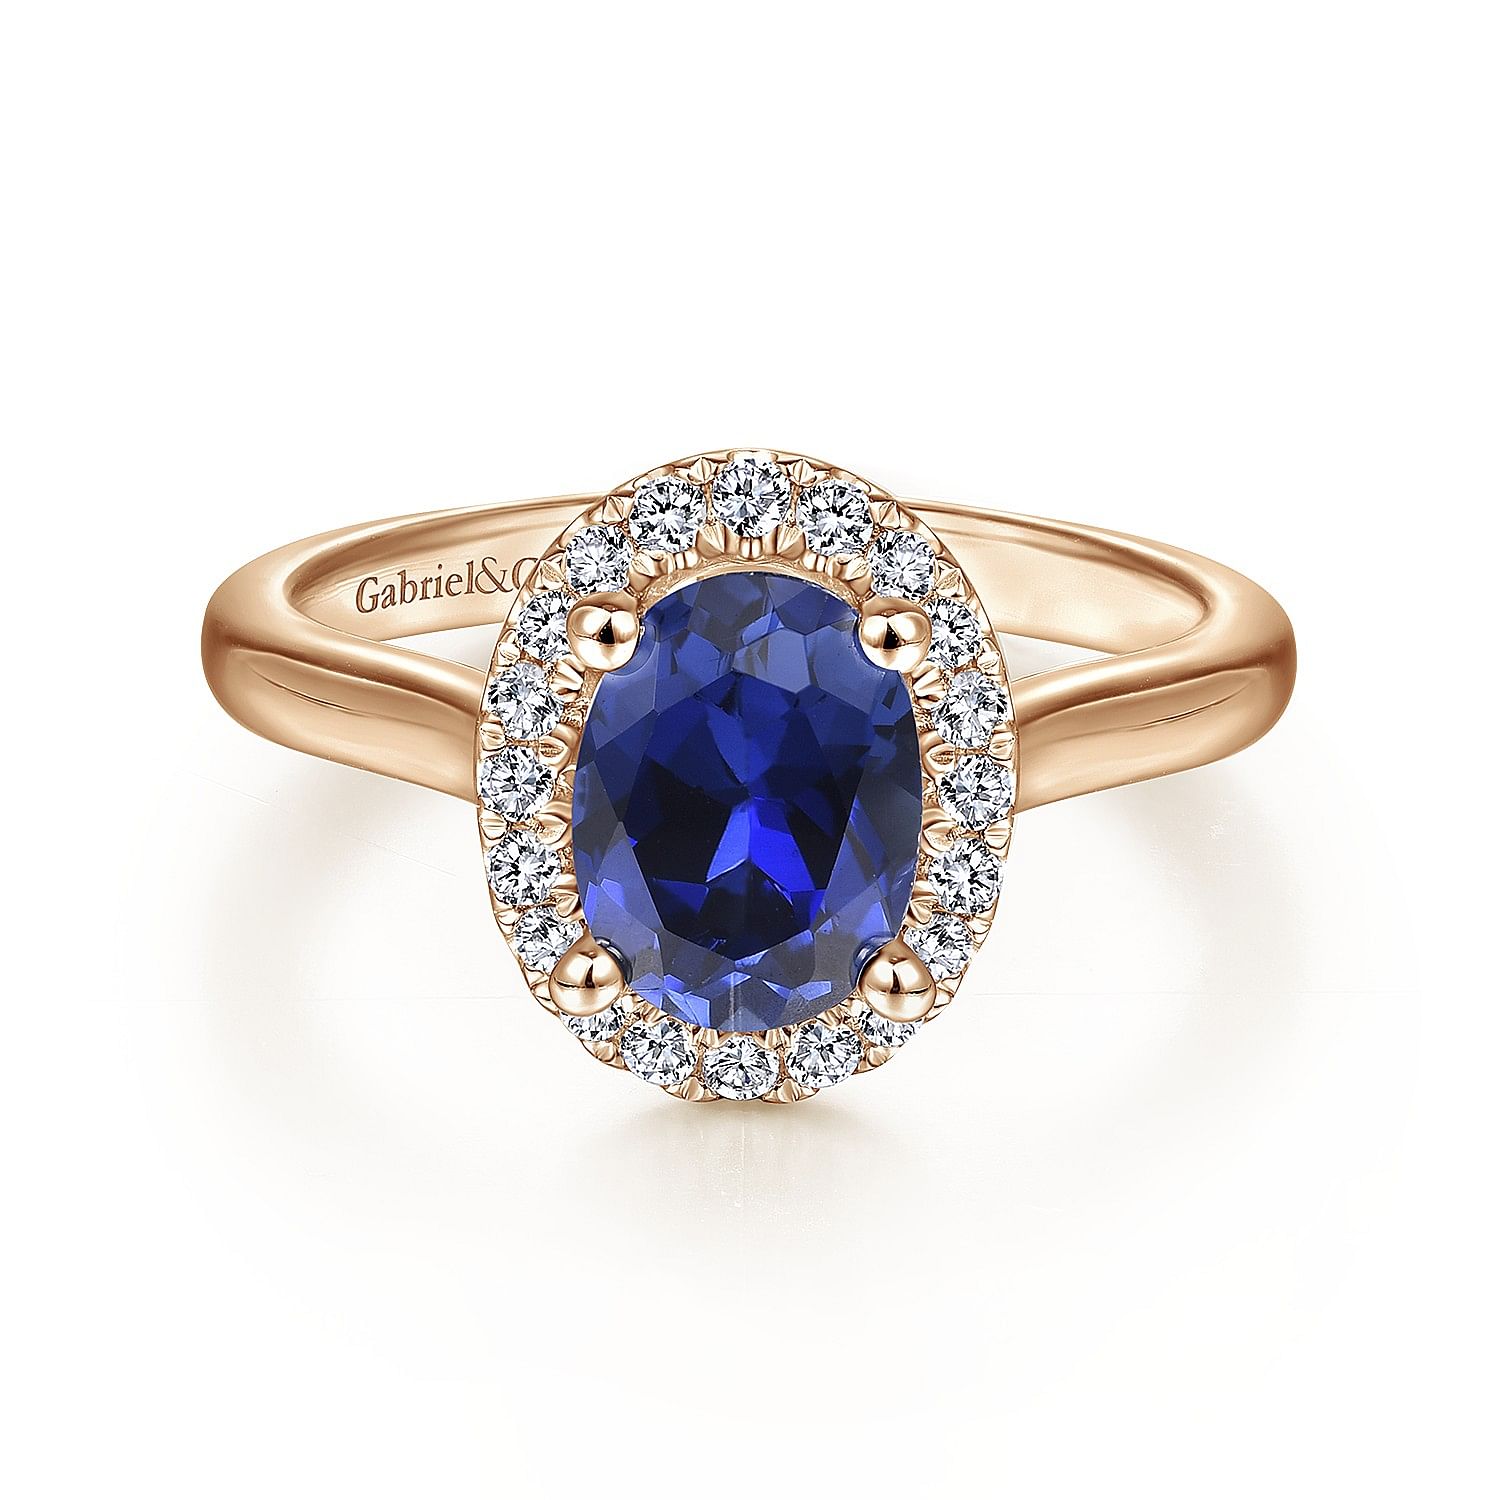 Gabriel - 14K Rose Gold Oval Halo Diamond and Sapphire Engagement Ring